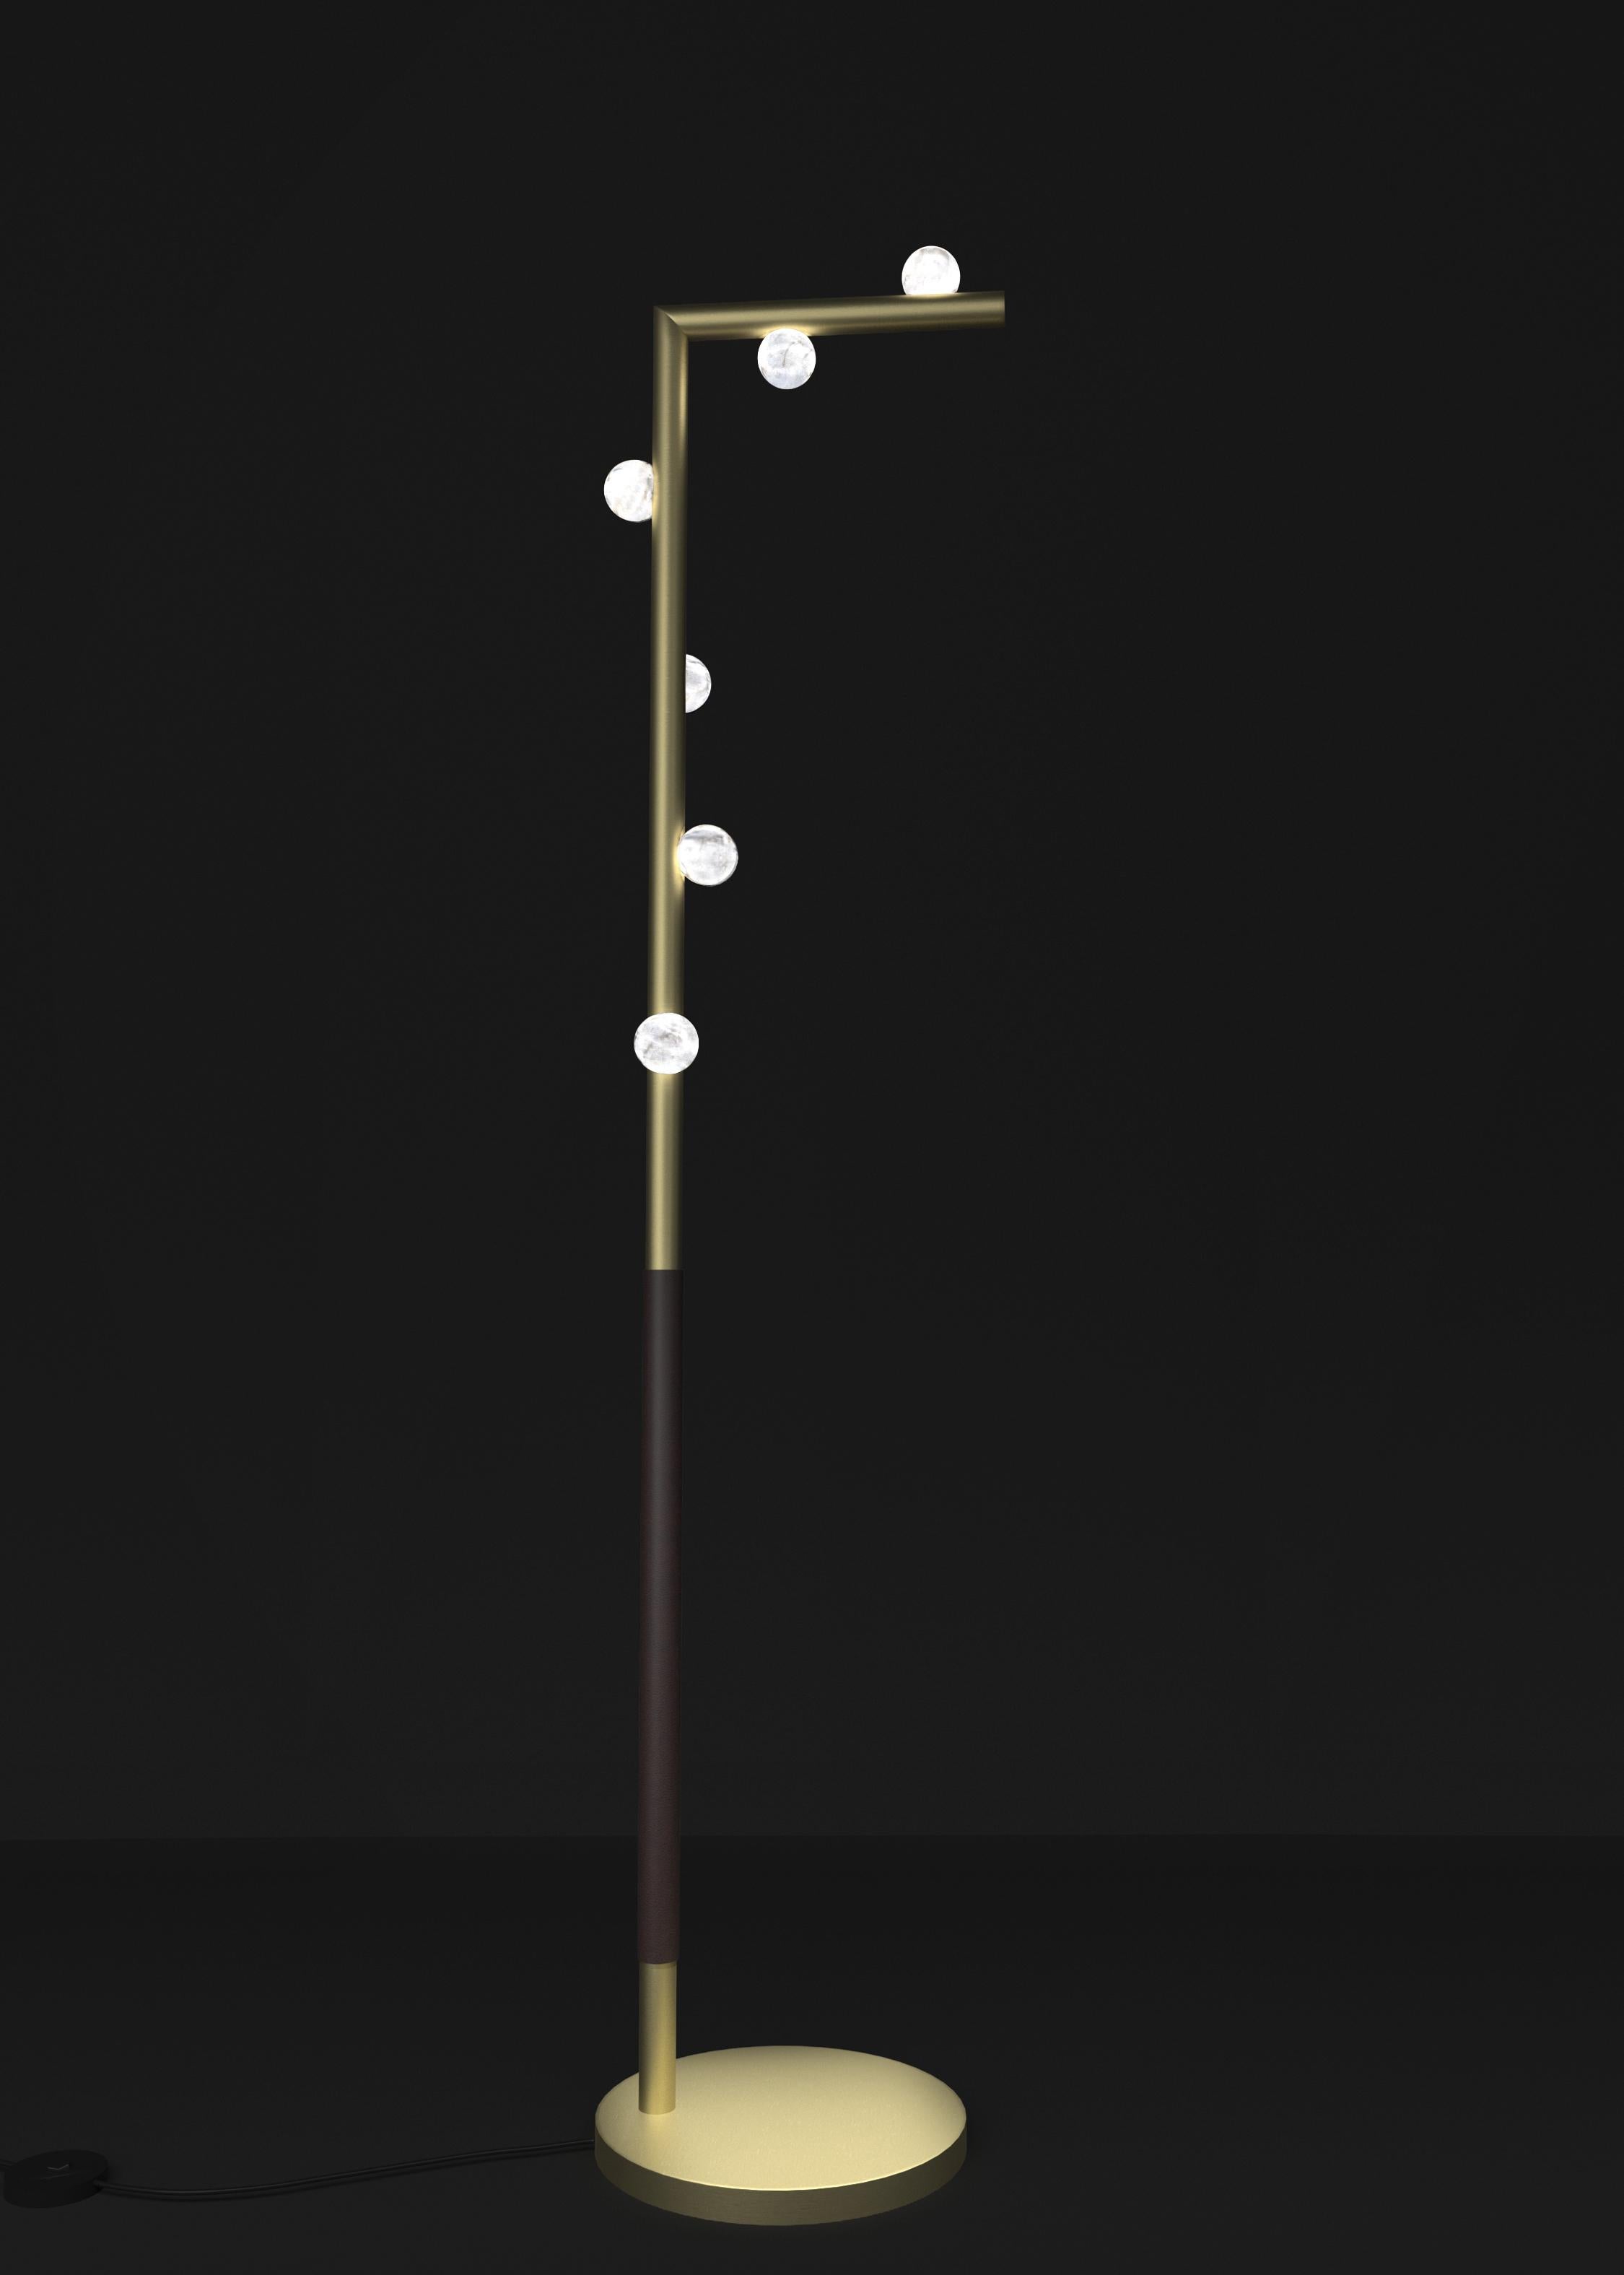 Demetra Brushed Brass Floor Lamp by Alabastro Italiano
Dimensions: D 30 x W 37 x H 158 cm.
Materials: White alabaster, brass and leather.

Available in different finishes: Shiny Silver, Bronze, Brushed Brass, Ruggine of Florence, Brushed Burnished,